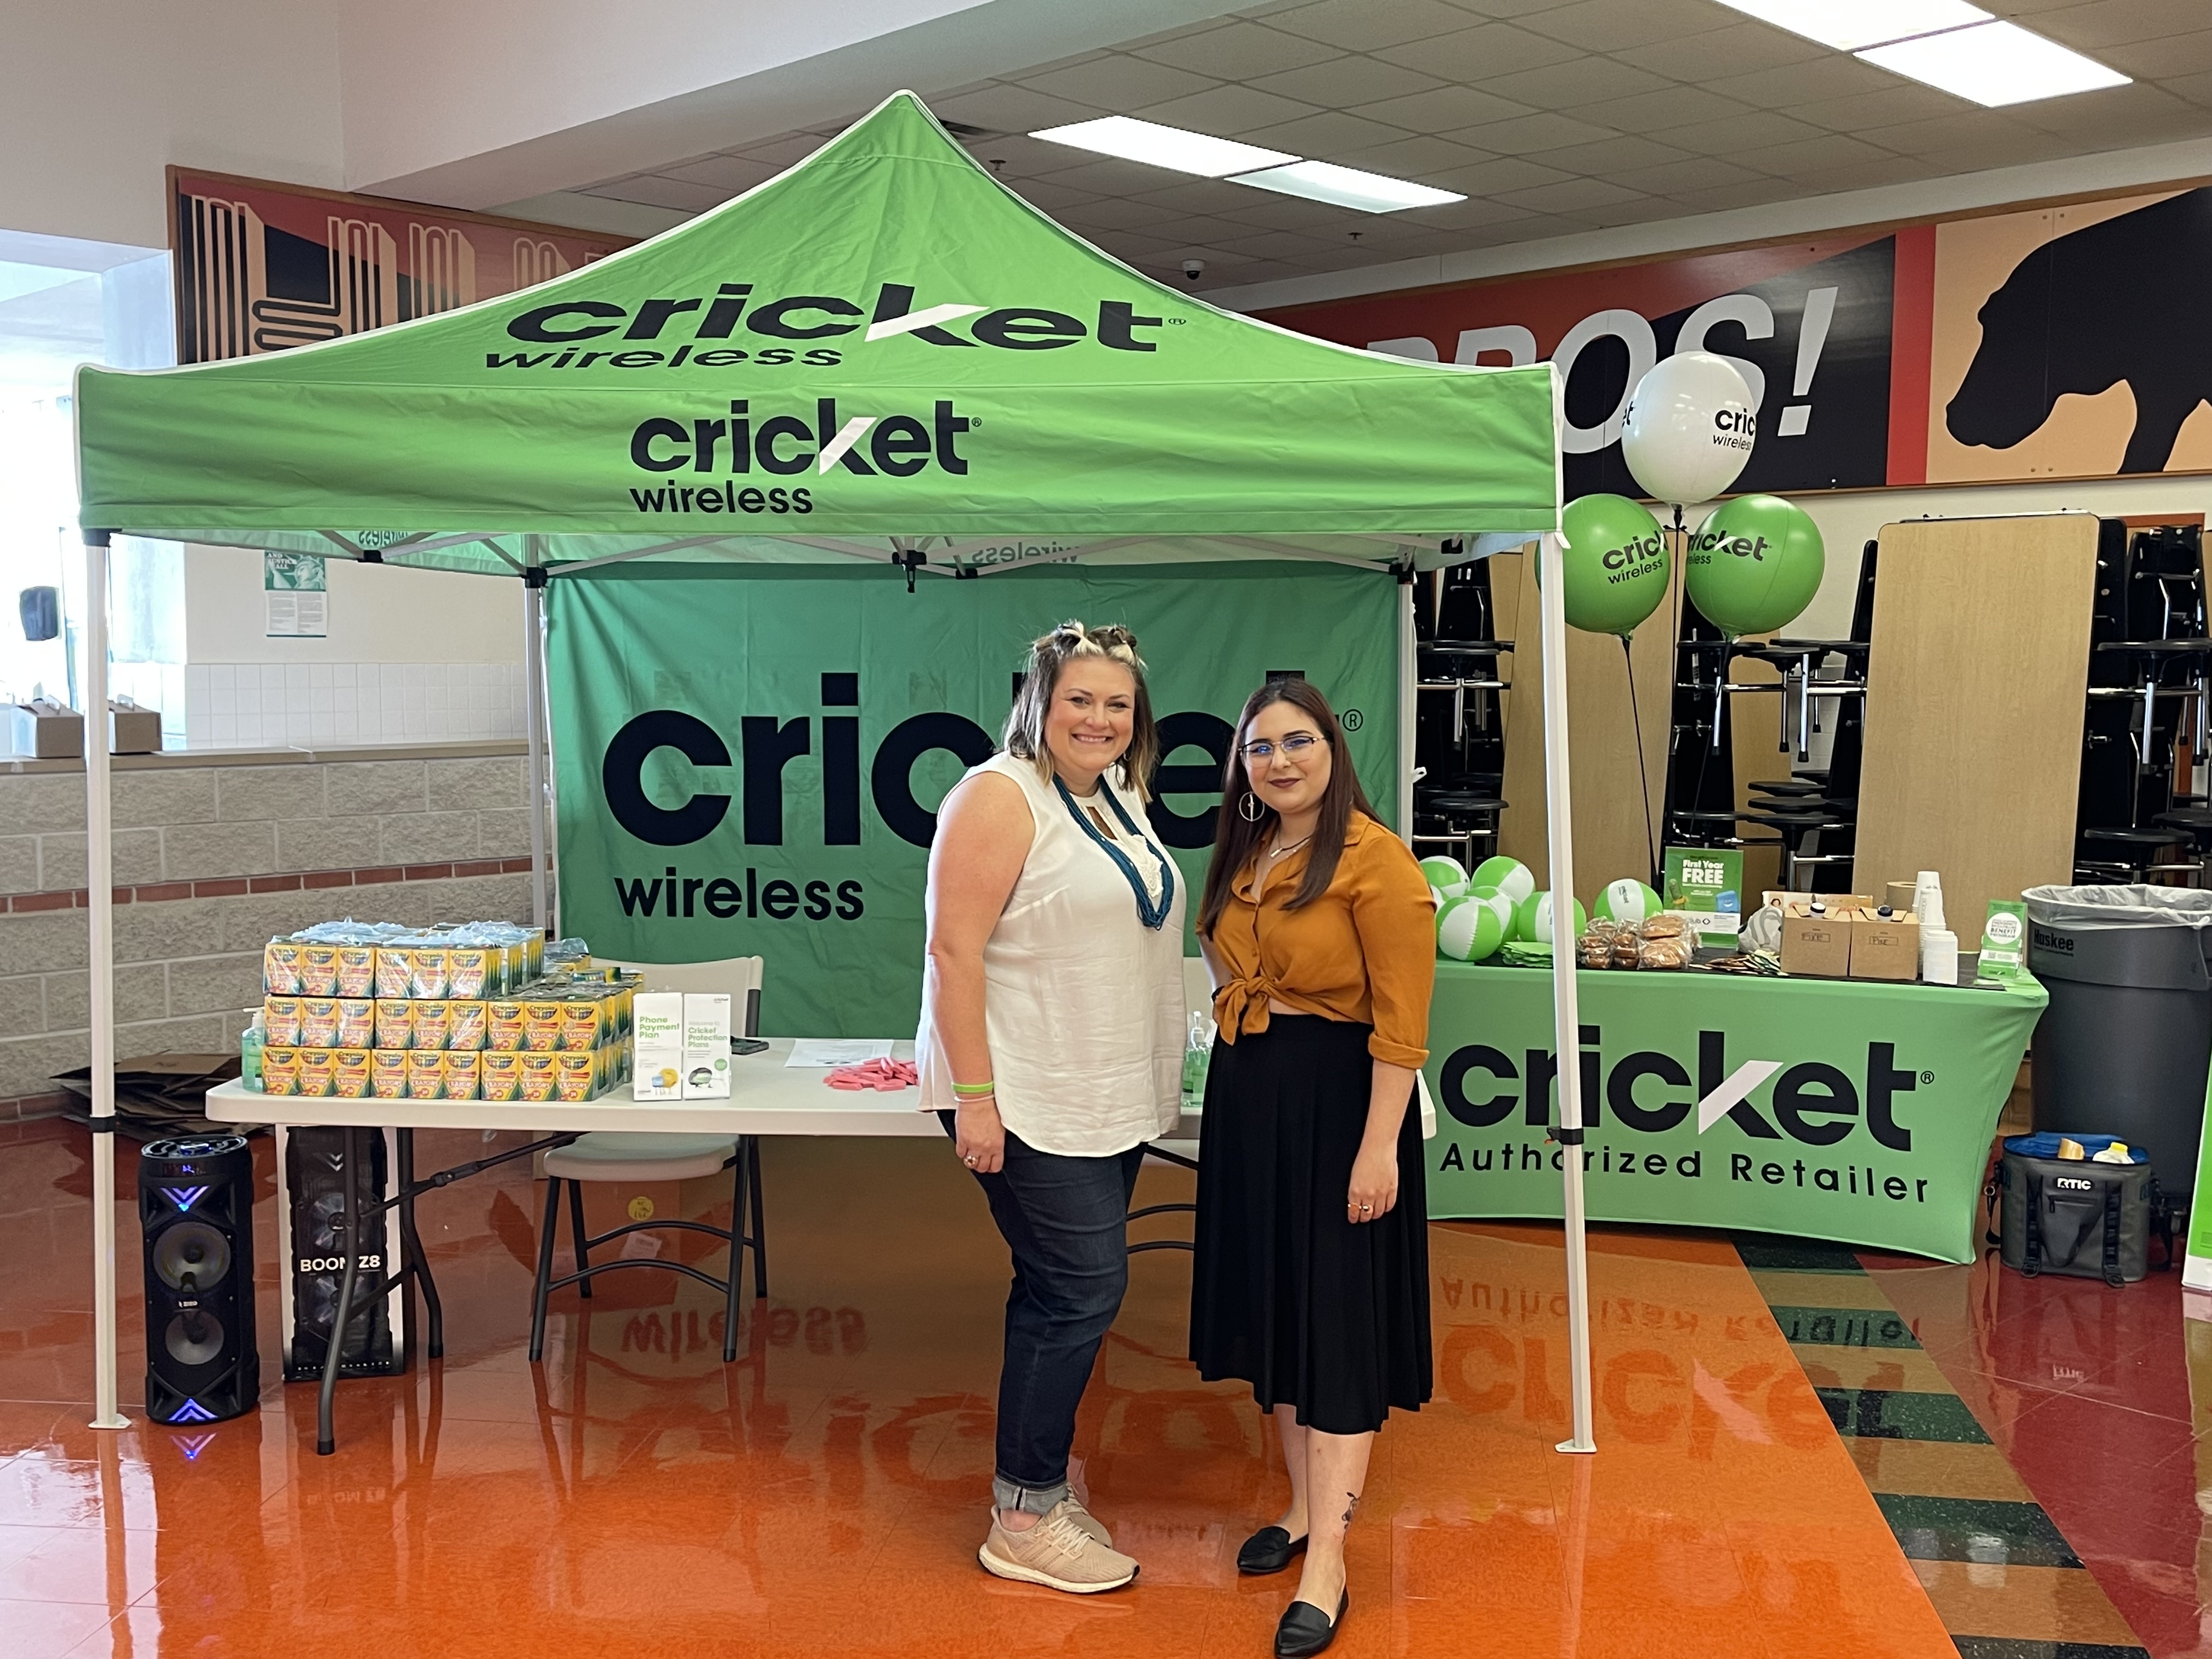 Cricket ARs at Hutto event